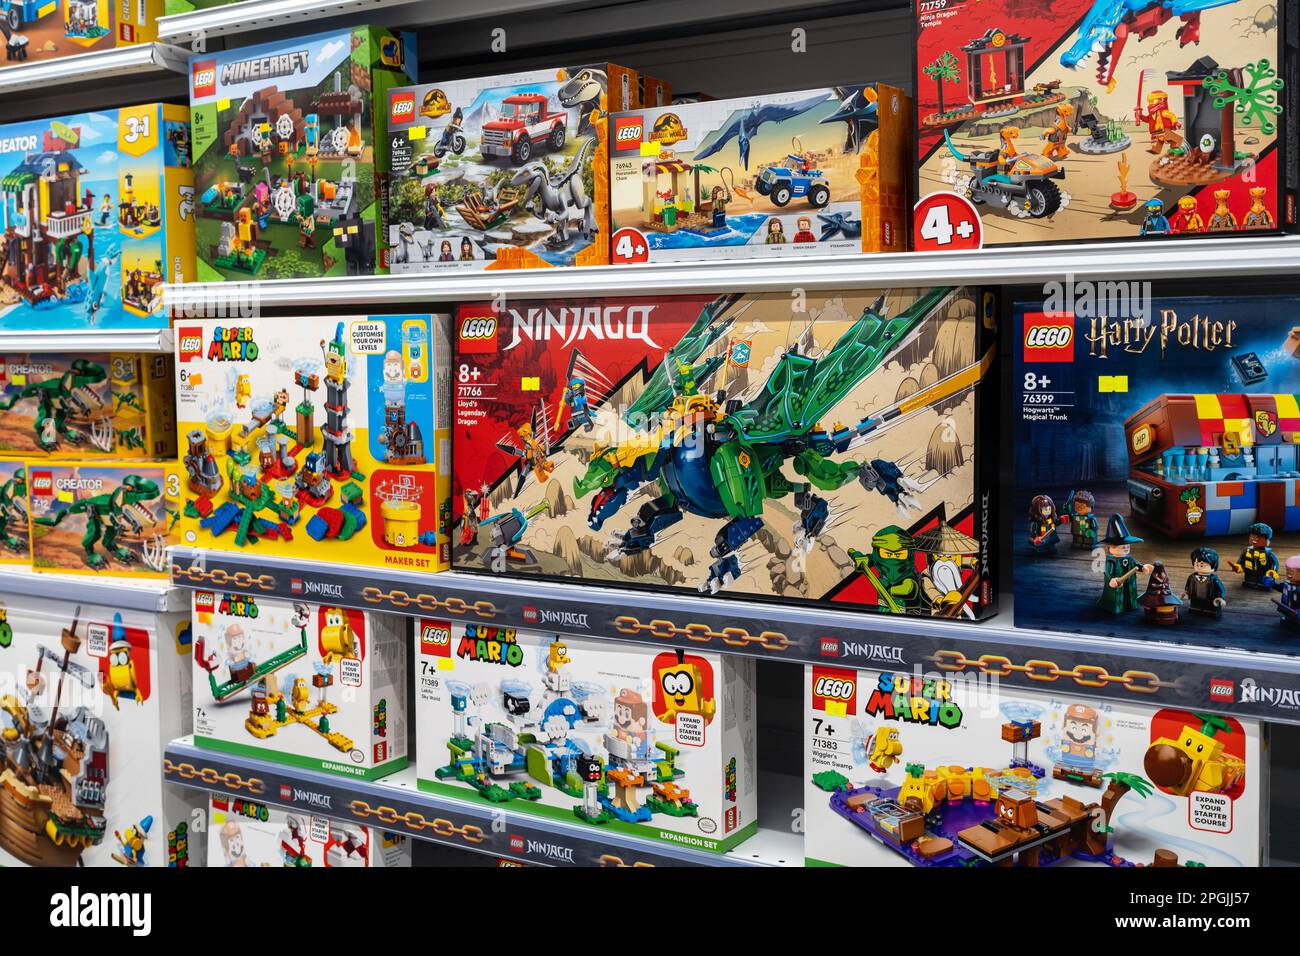 Lego construction kits for sale at Lego Store. Lego is a line of plastic construction toys, manufactured by Lego Group company. Minsk, Belarus, 2023 Stock Photo